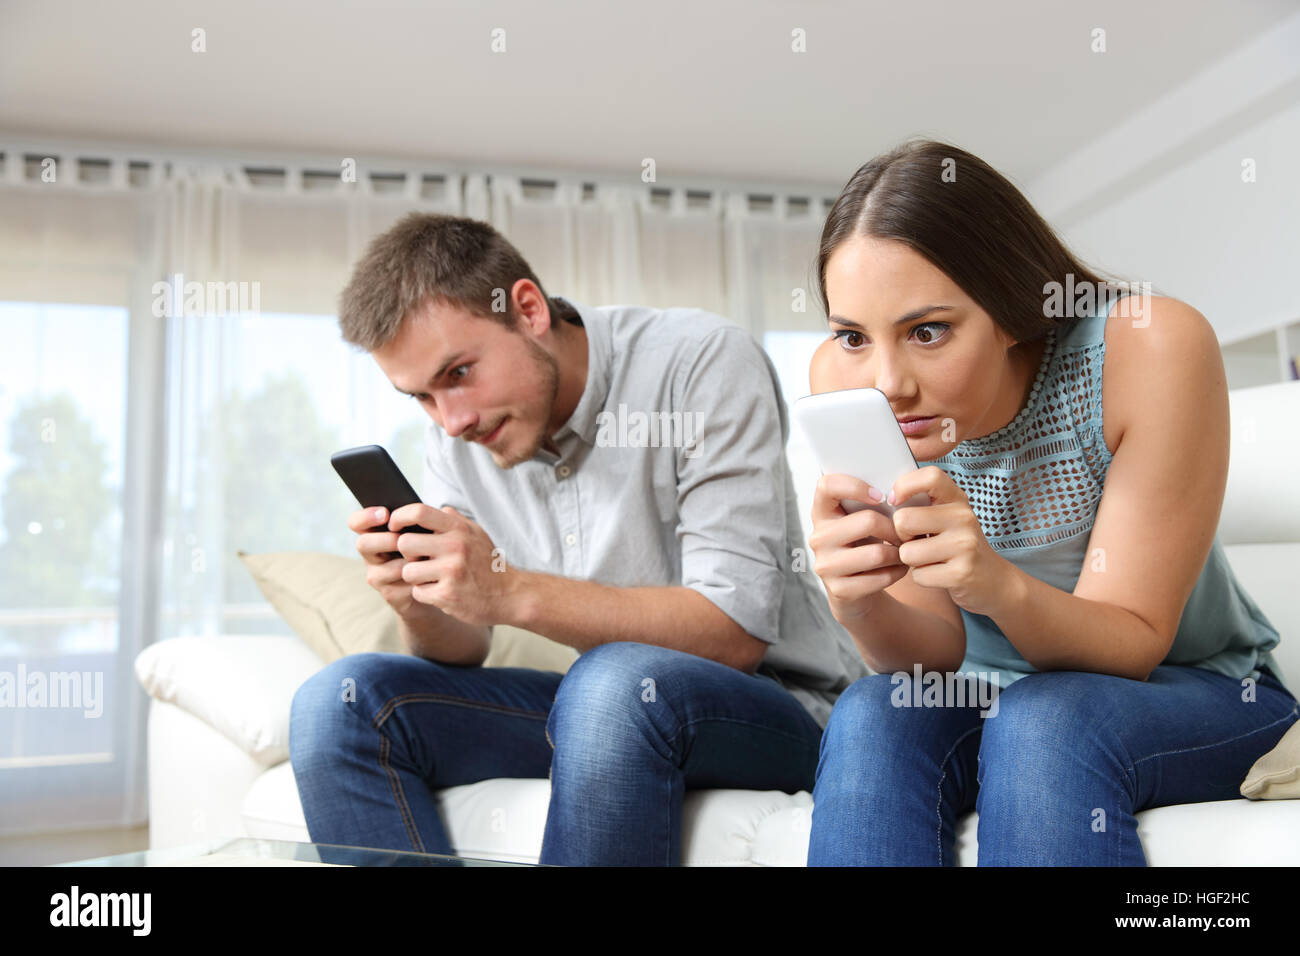 Obsessed couple of roommates with their smart phones ignoring each other sitting on a couch at home Stock Photo